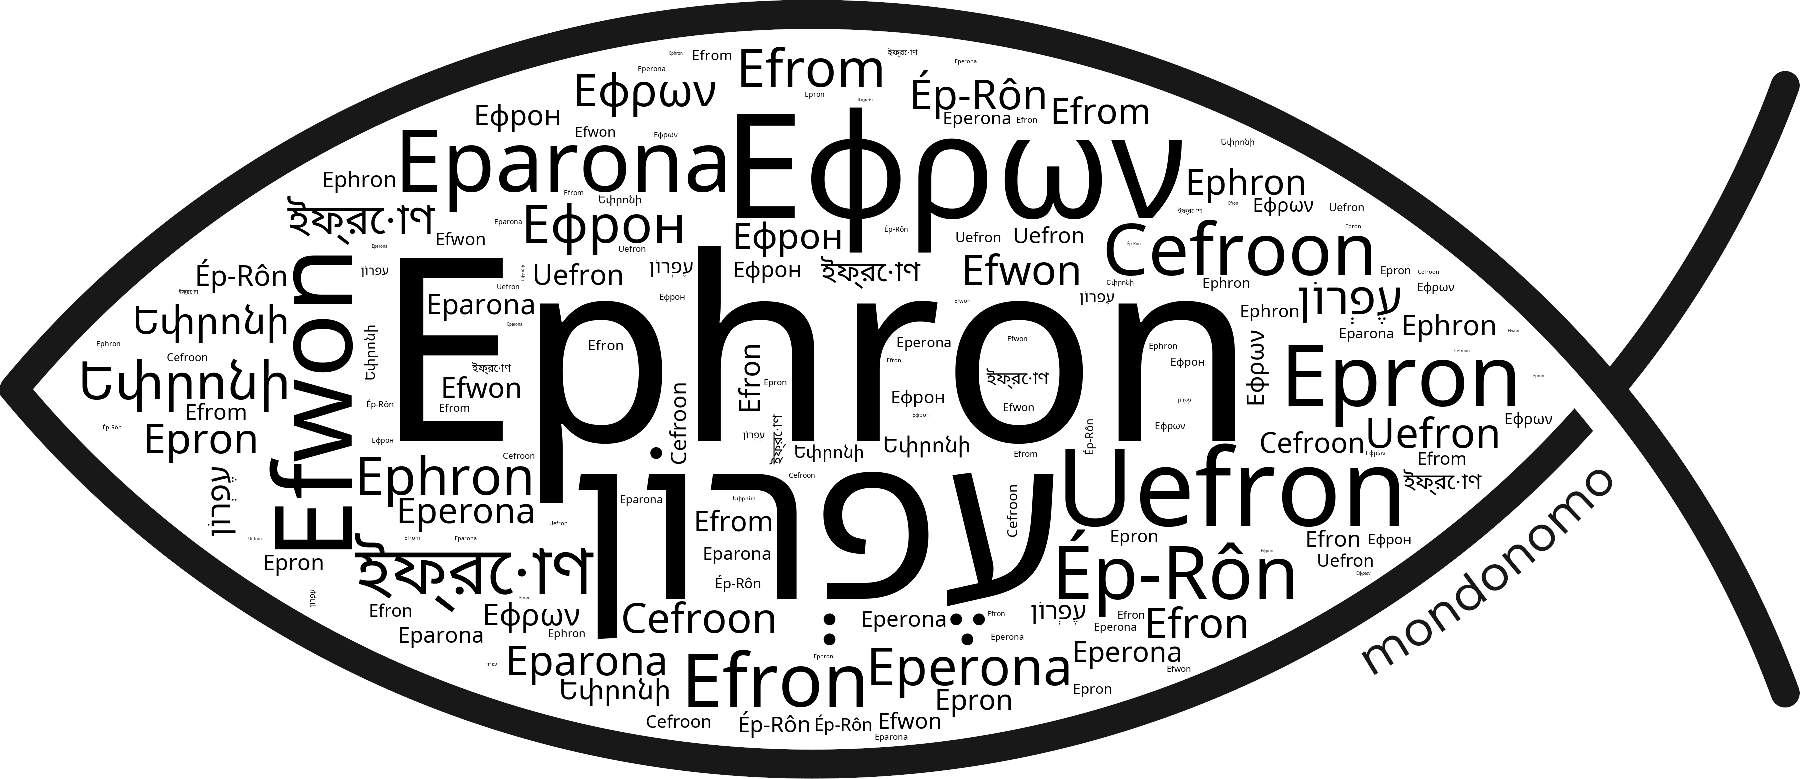 Name Ephron in the world's Bibles